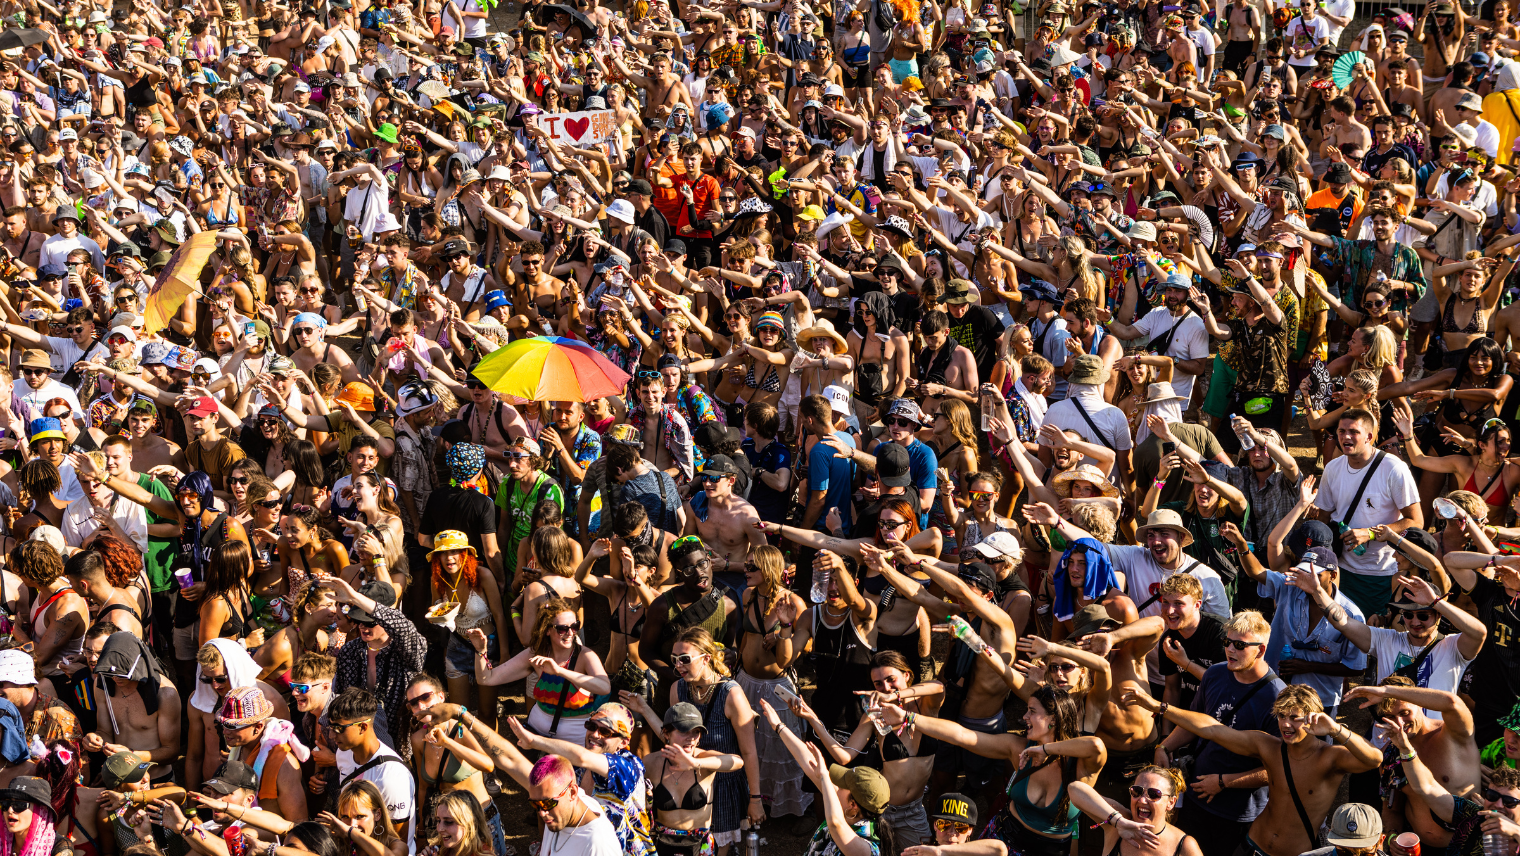 A crowd at Boomtown 